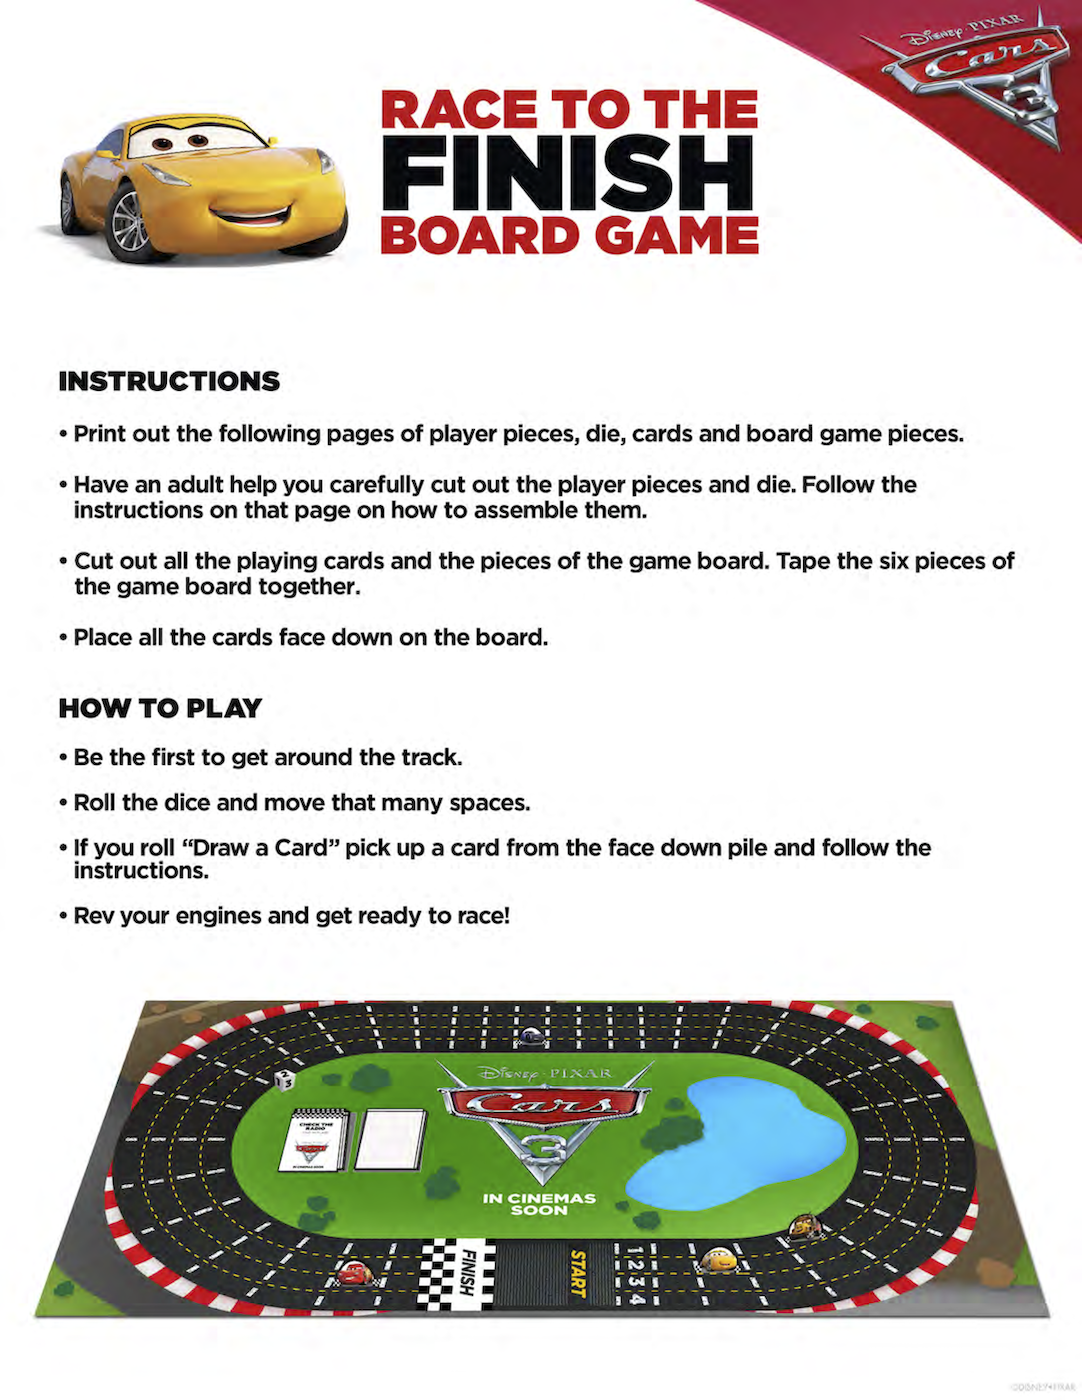 Cars 3 Race to the Finish Board Game